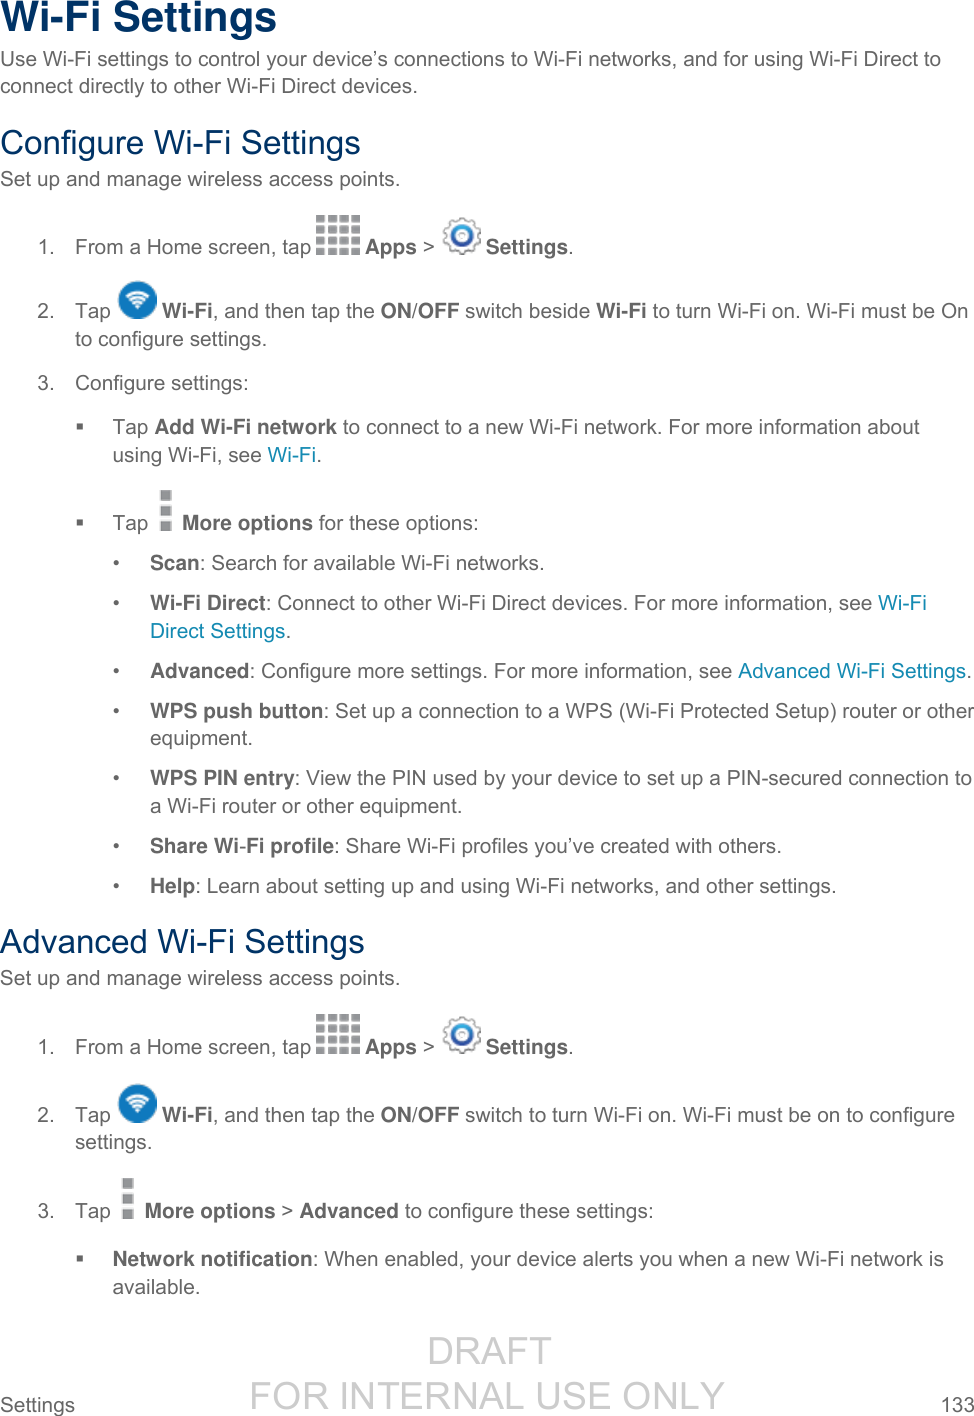                  DRAFT FOR INTERNAL USE ONLY Settings  133   Wi-Fi Settings Use Wi-Fi settings to control your device’s connections to Wi-Fi networks, and for using Wi-Fi Direct to connect directly to other Wi-Fi Direct devices. Configure Wi-Fi Settings Set up and manage wireless access points. 1.  From a Home screen, tap   Apps &gt;   Settings.  2.  Tap   Wi-Fi, and then tap the ON/OFF switch beside Wi-Fi to turn Wi-Fi on. Wi-Fi must be On to configure settings. 3.  Configure settings:   Tap Add Wi-Fi network to connect to a new Wi-Fi network. For more information about using Wi-Fi, see Wi-Fi.   Tap   More options for these options: • Scan: Search for available Wi-Fi networks. • Wi-Fi Direct: Connect to other Wi-Fi Direct devices. For more information, see Wi-Fi Direct Settings. • Advanced: Configure more settings. For more information, see Advanced Wi-Fi Settings. • WPS push button: Set up a connection to a WPS (Wi-Fi Protected Setup) router or other equipment. • WPS PIN entry: View the PIN used by your device to set up a PIN-secured connection to a Wi-Fi router or other equipment. • Share Wi-Fi profile: Share Wi-Fi profiles you’ve created with others. • Help: Learn about setting up and using Wi-Fi networks, and other settings. Advanced Wi-Fi Settings Set up and manage wireless access points. 1.  From a Home screen, tap   Apps &gt;   Settings.  2.  Tap   Wi-Fi, and then tap the ON/OFF switch to turn Wi-Fi on. Wi-Fi must be on to configure settings. 3.  Tap   More options &gt; Advanced to configure these settings:  Network notification: When enabled, your device alerts you when a new Wi-Fi network is available. 